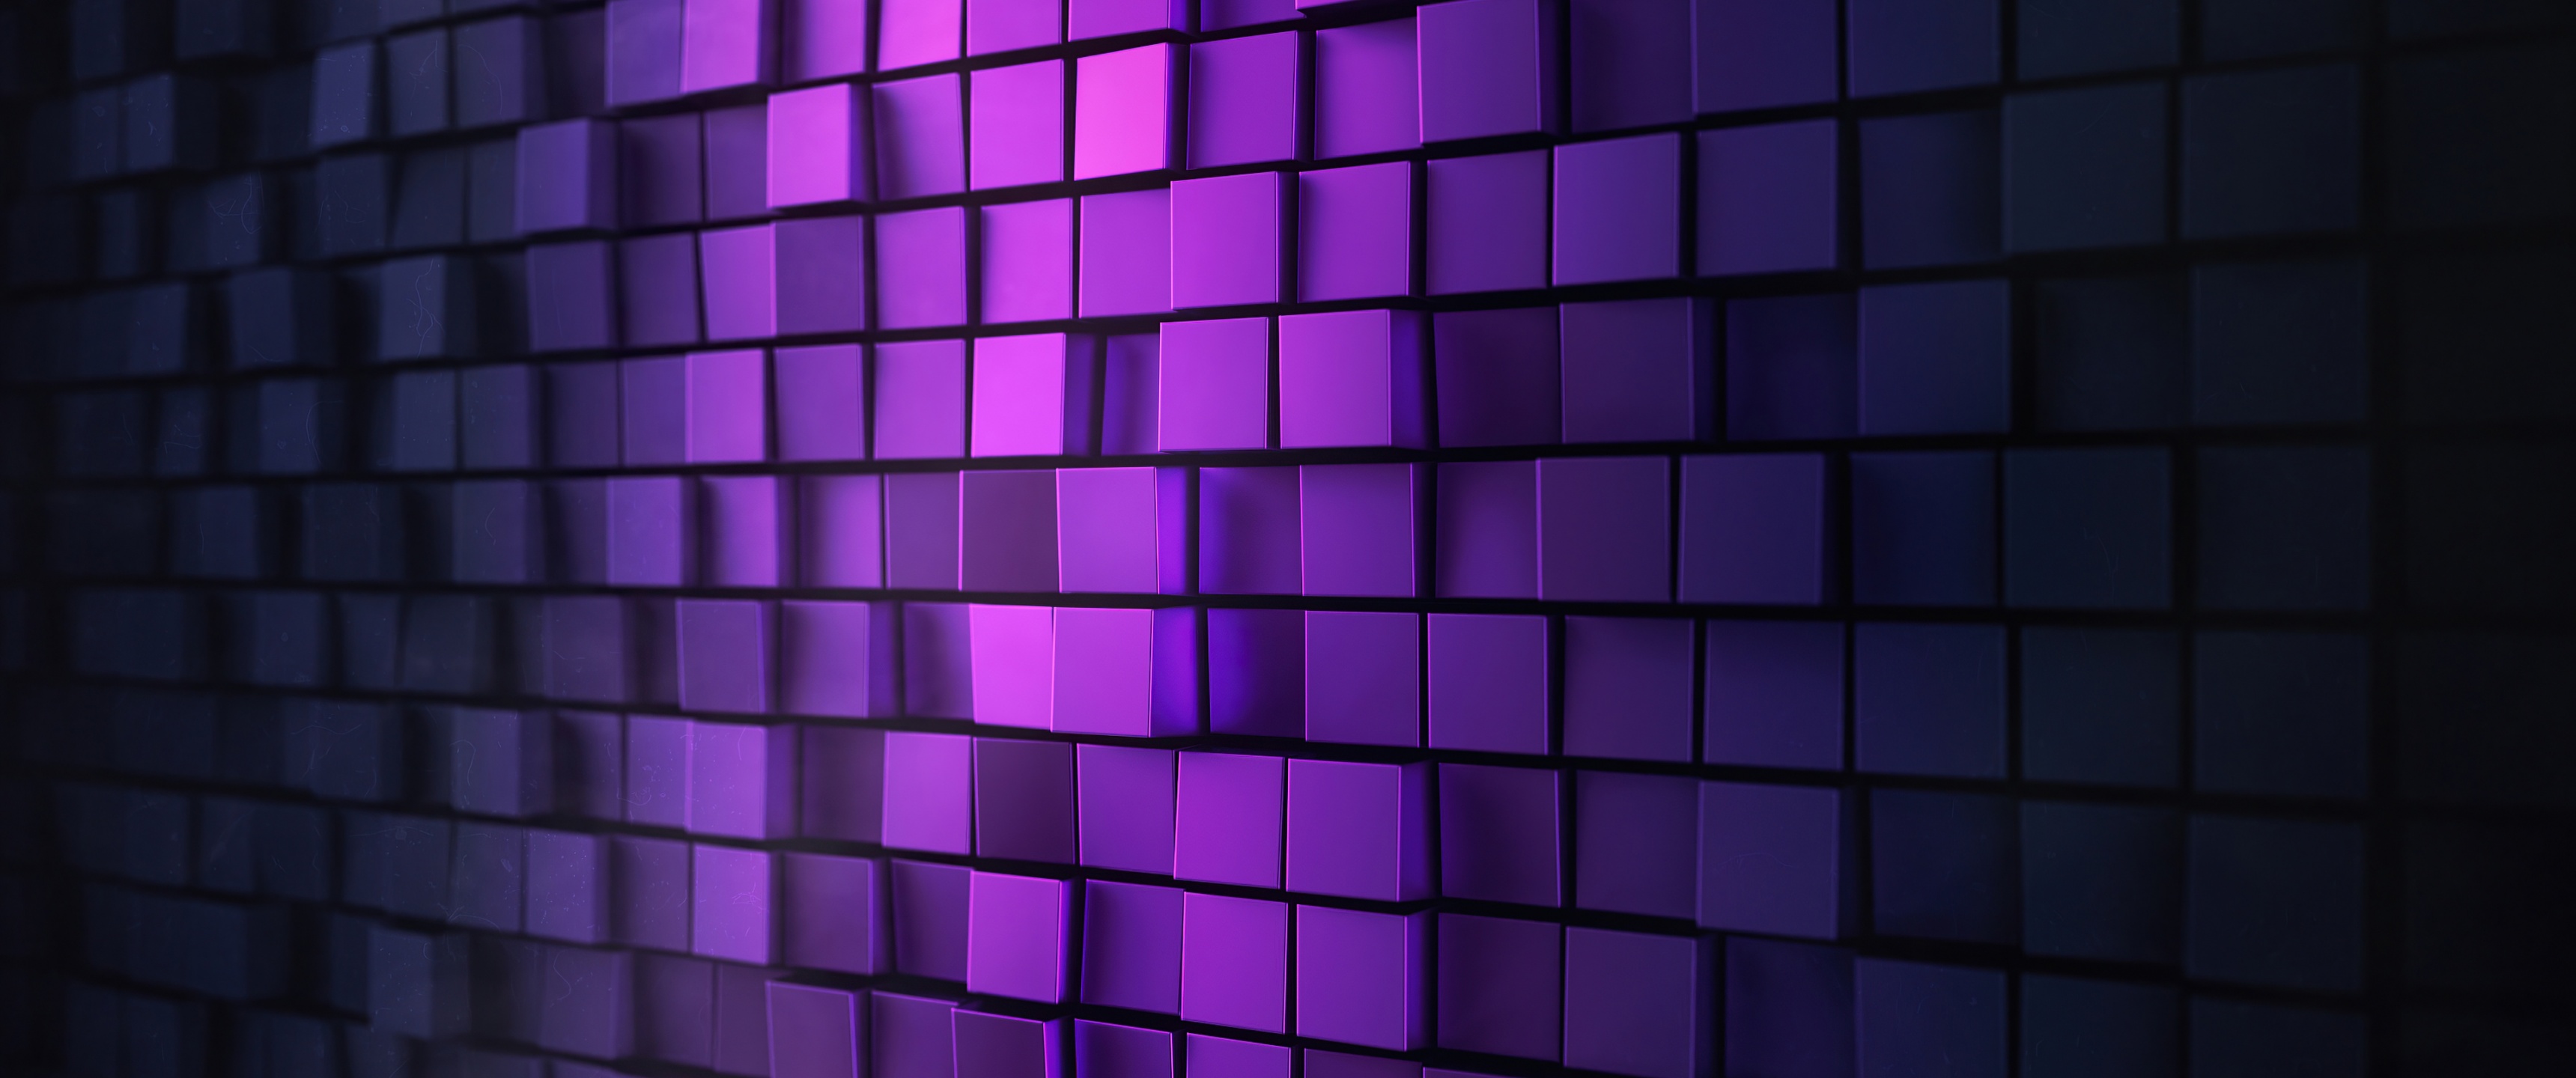 3D background Wallpaper 4K, Squares, Purple light, Abstract, #2700